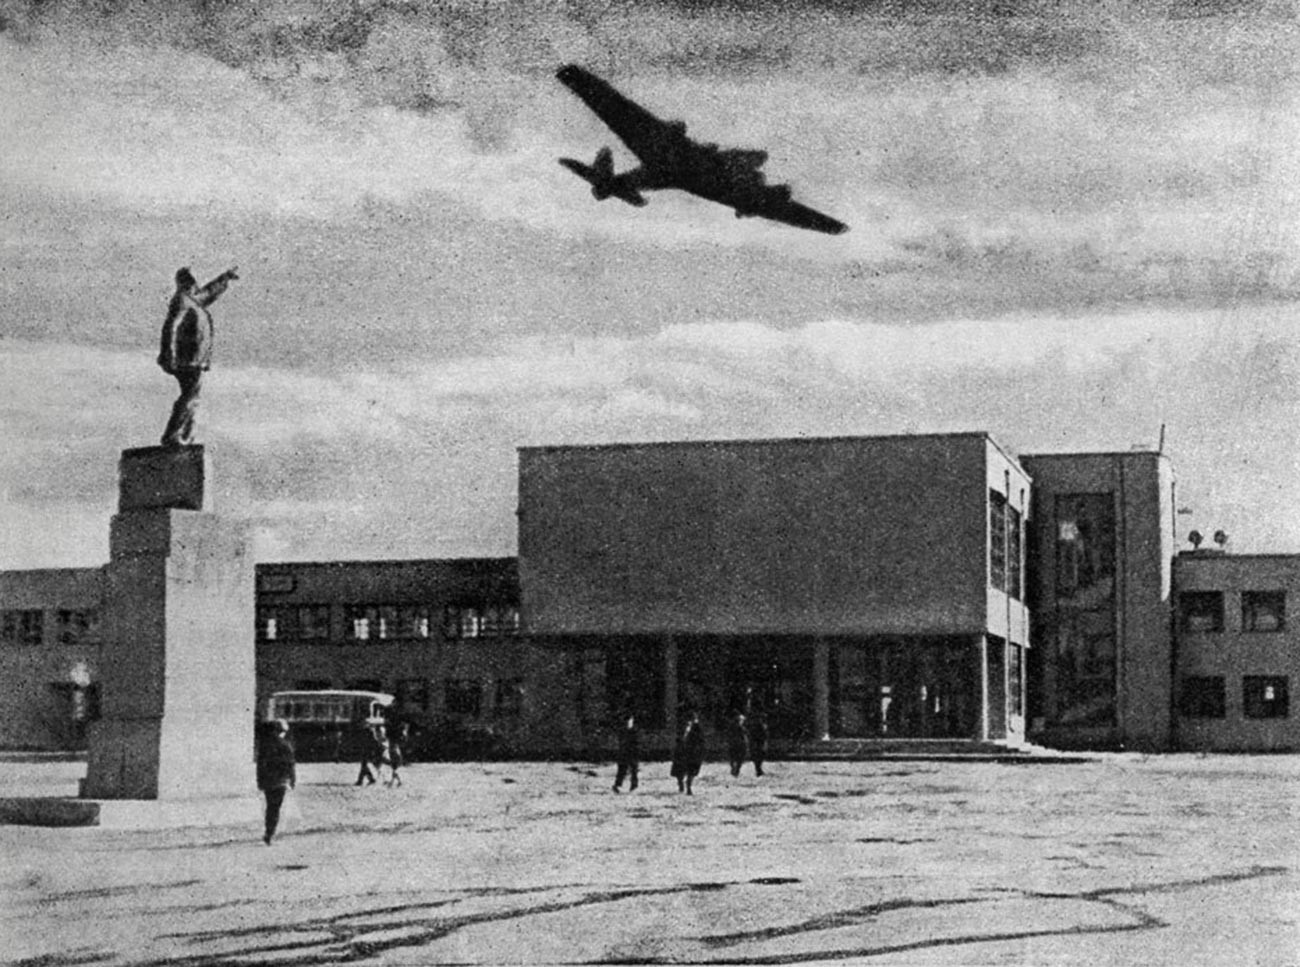 ANT-14 at the Khodynskoe Pole airport, 1934.